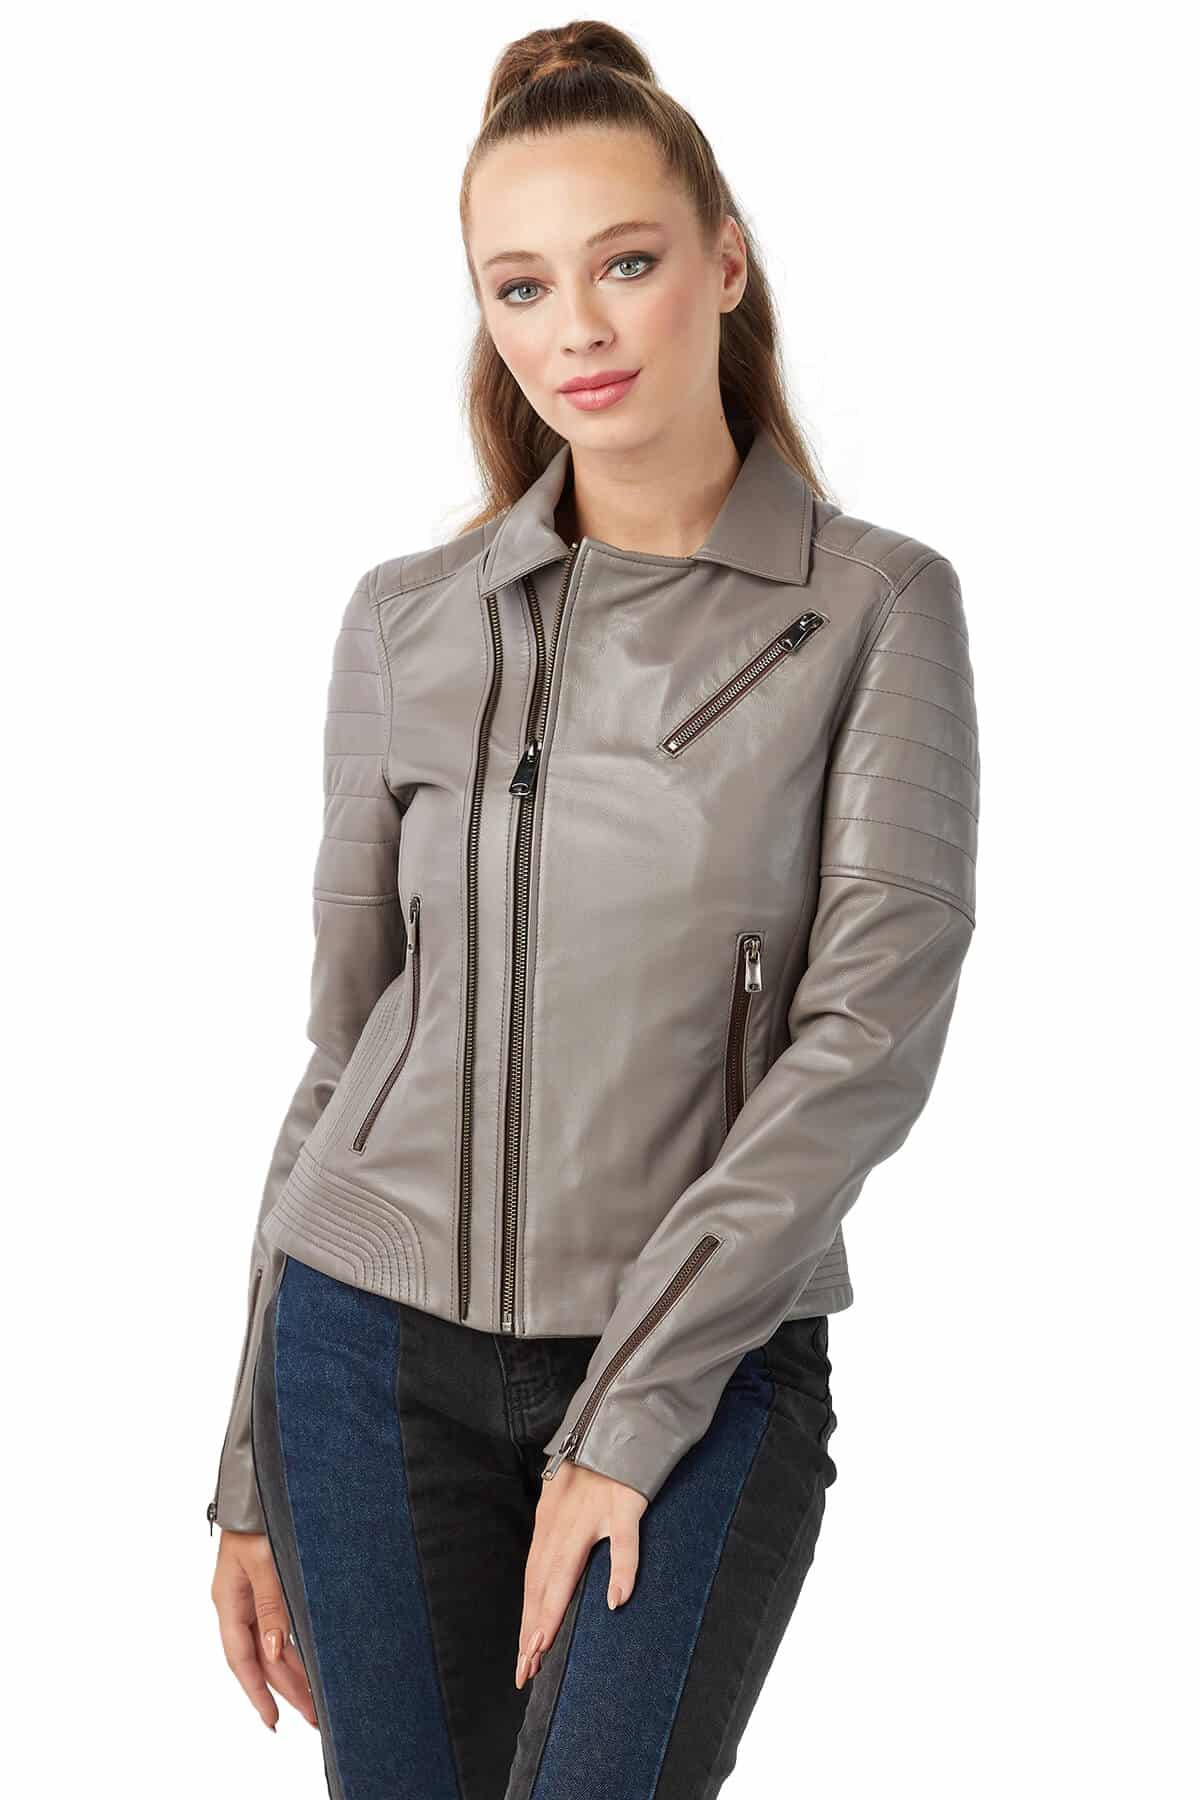 Buy ToodiiIN Woman Ladies Coat Jacket Winter Stylish Warm Lapel Button Long  Trench Coat Jacket Ladies Overcoat Outwear for Daily & Work & Travel B2  (Beige, S) at Amazon.in